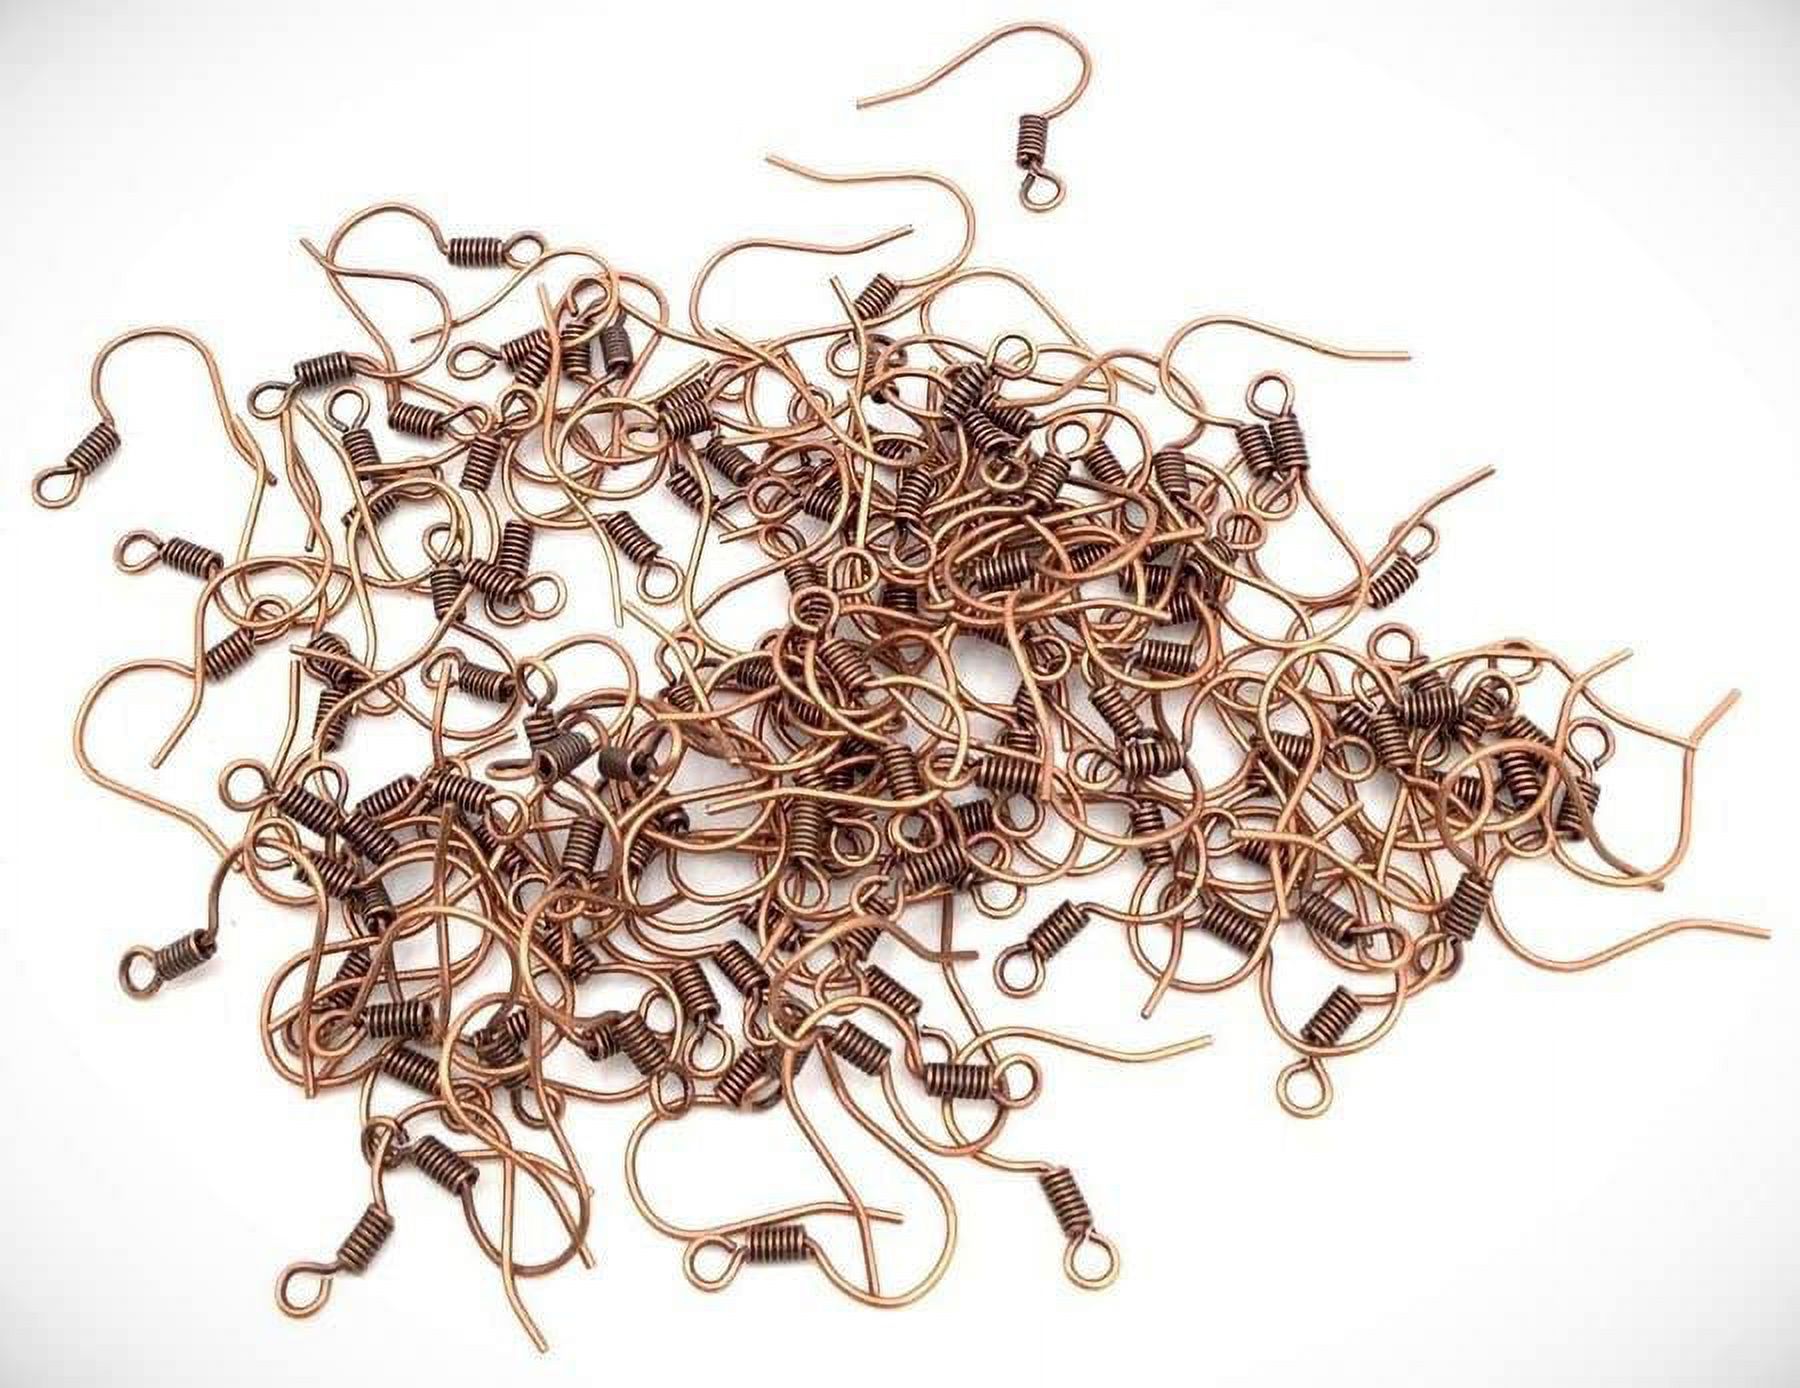 100 Earrings Earwire Fish Hooks Earrings Findings Supplies Antique Copper  Beads for Jewelry Making Bracelets, Necklaces Supplies for DIY Crafts  Beadwork 